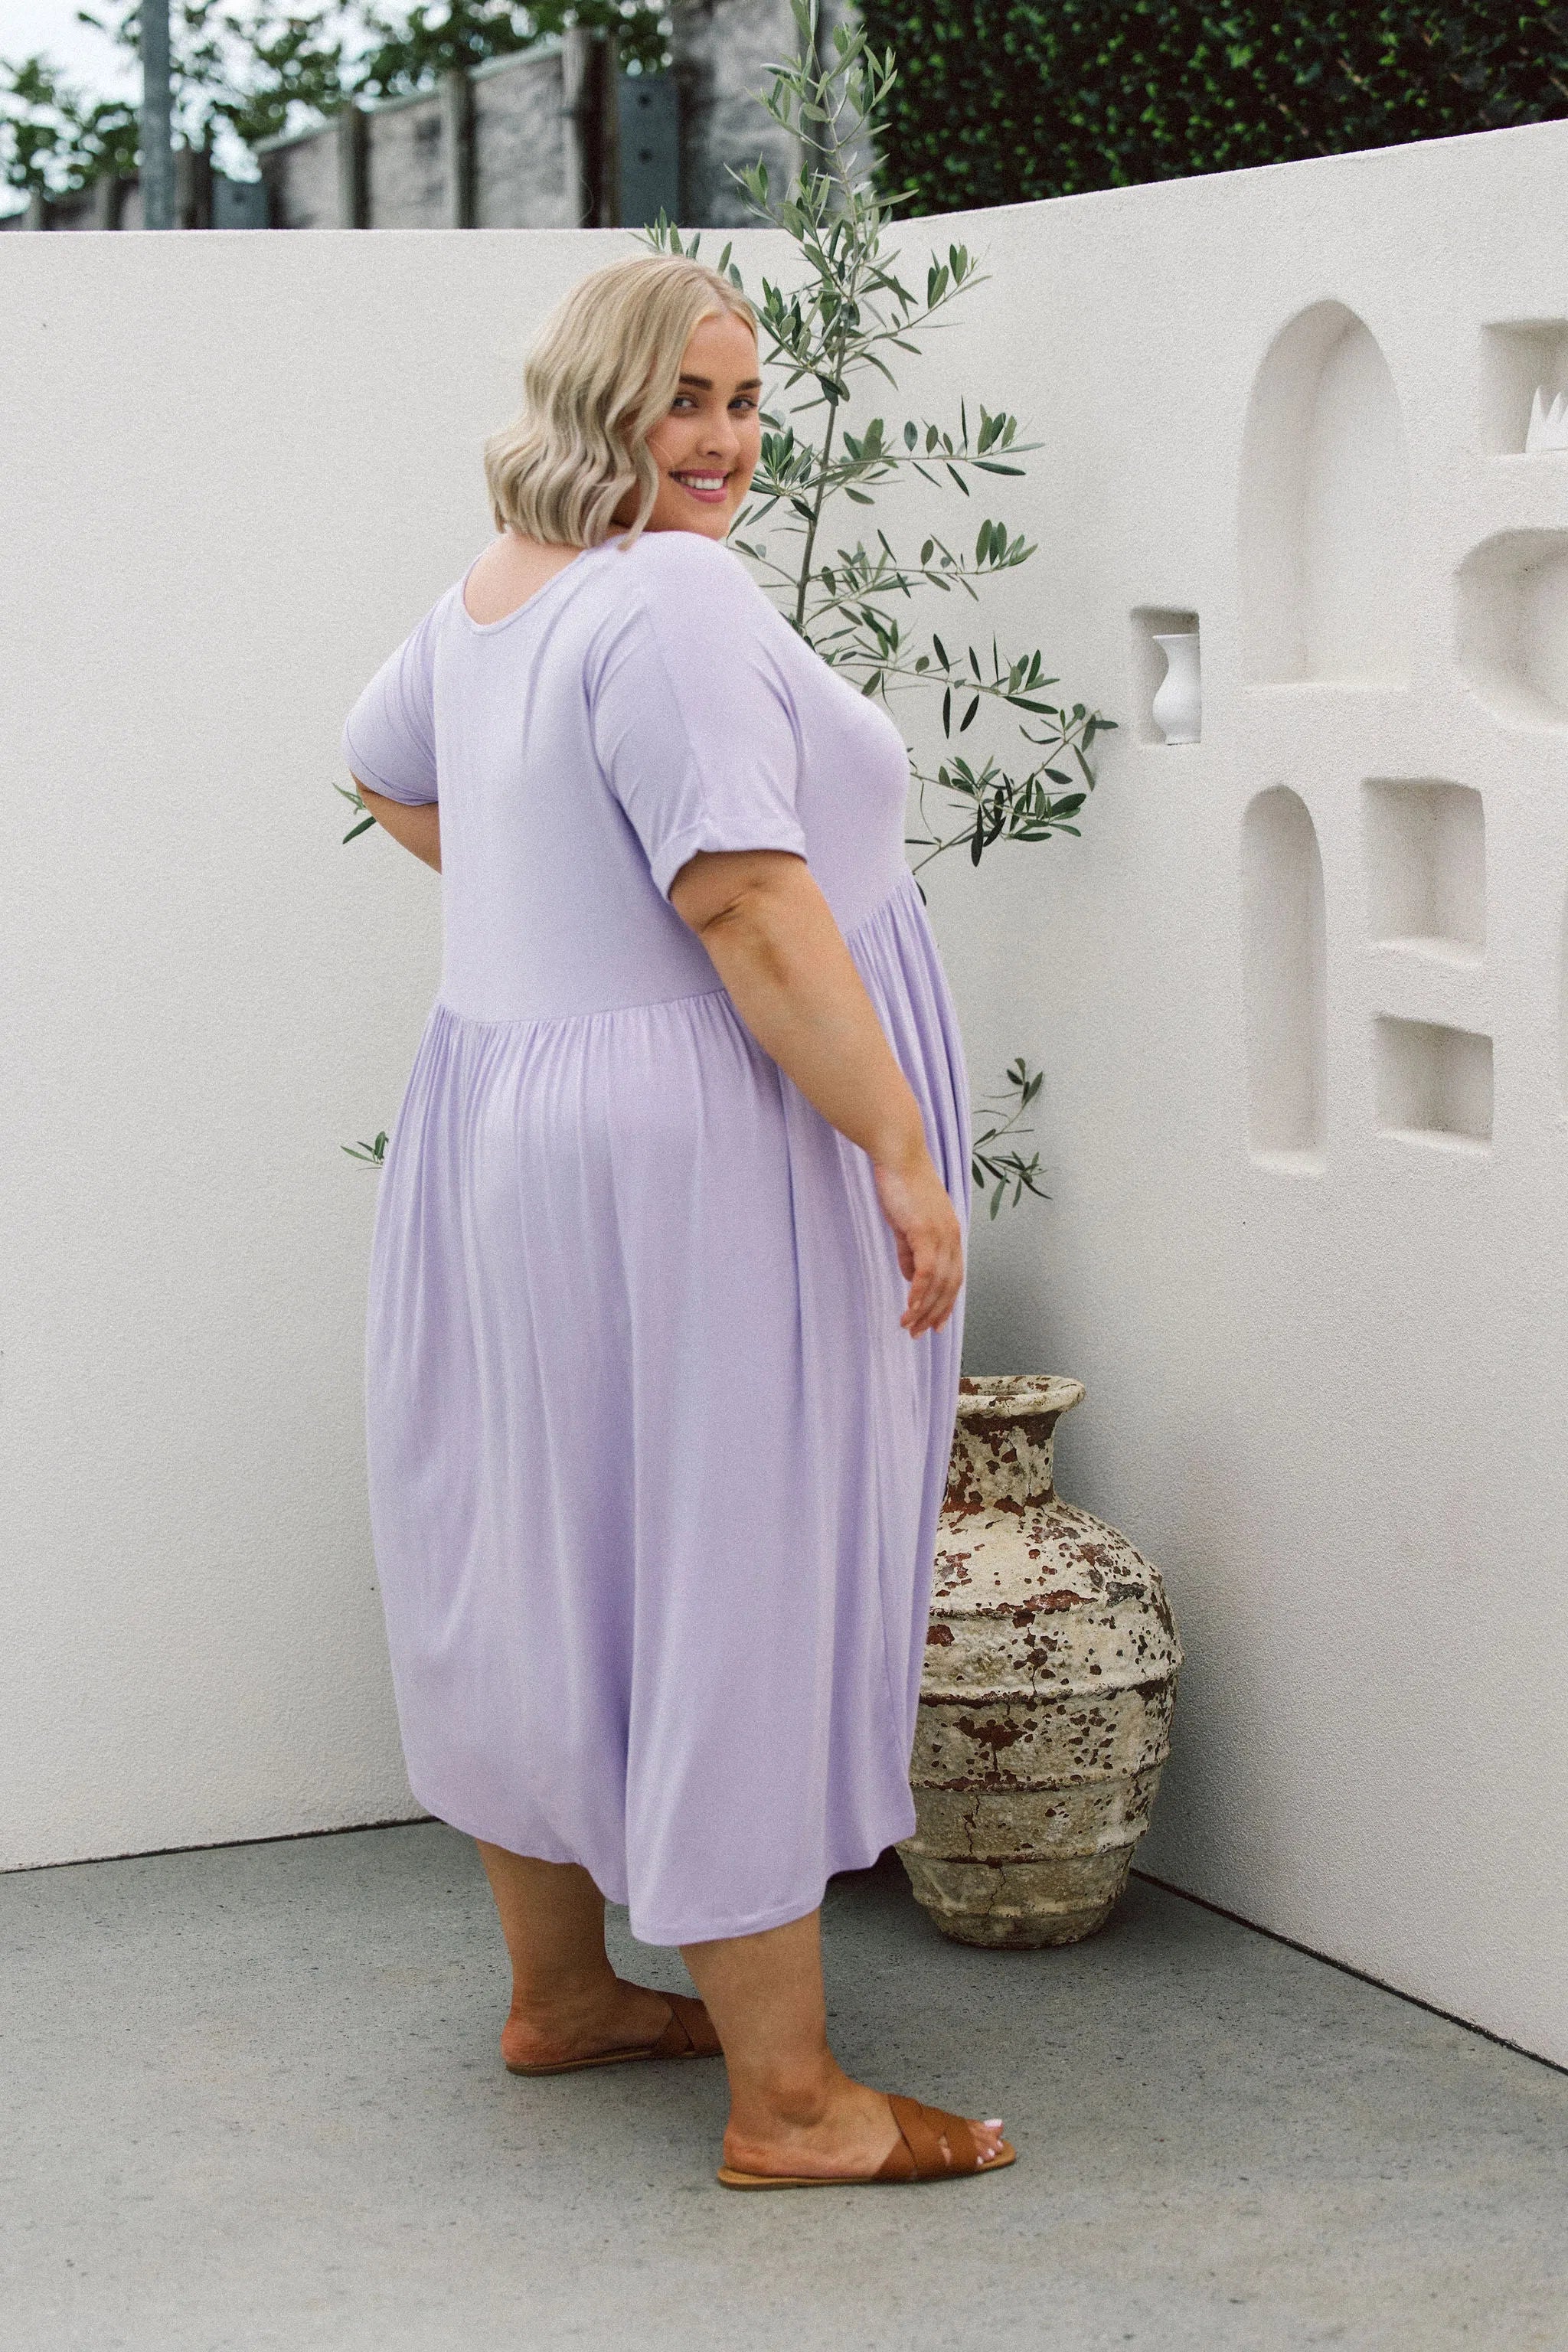 Peach The Label Womens Plus Size Dress - Ashleigh Dress in Lilac for Curvy Women